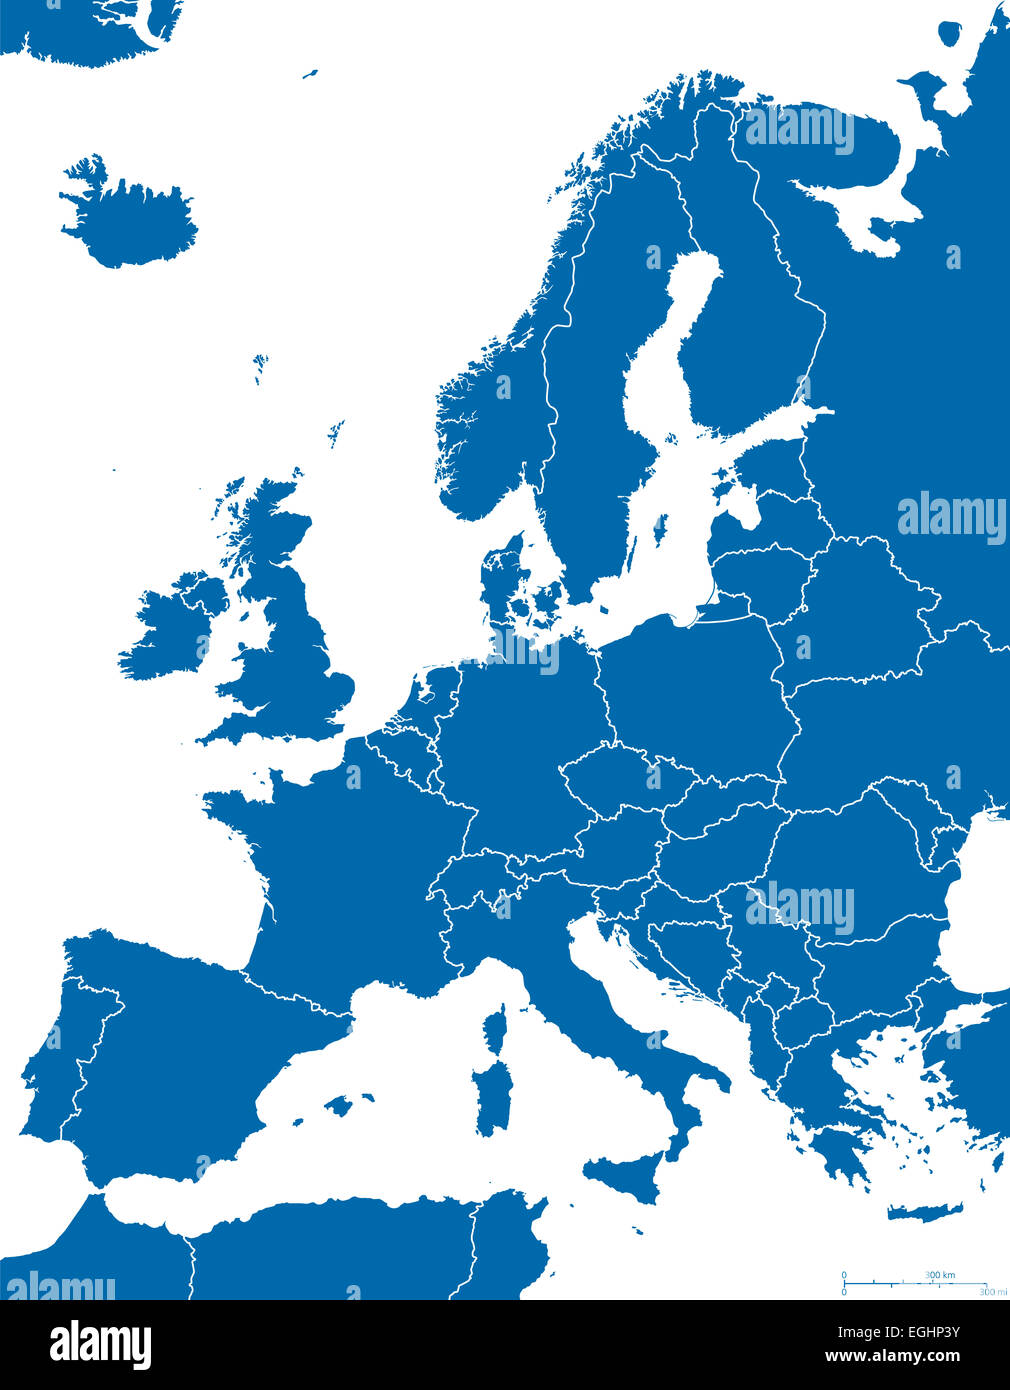 Europe Political Map Outline Stock Photo